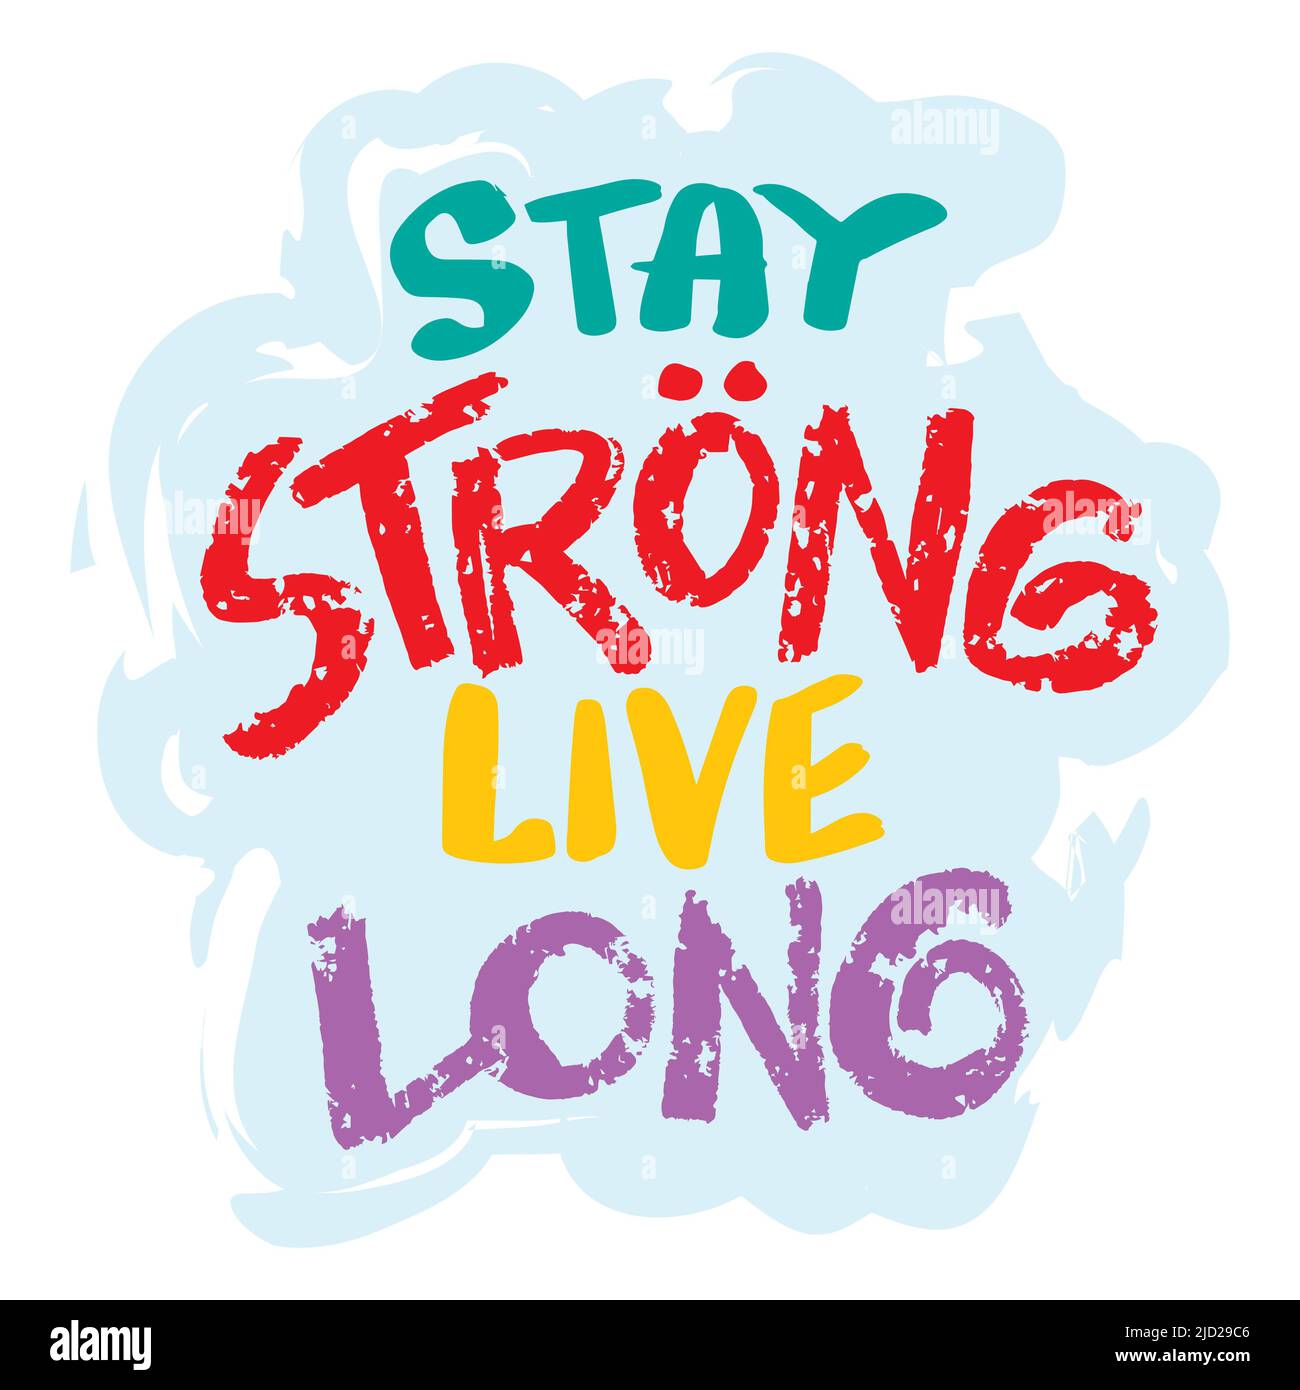 Stay strong live long. Poster quotes Stock Photo - Alamy